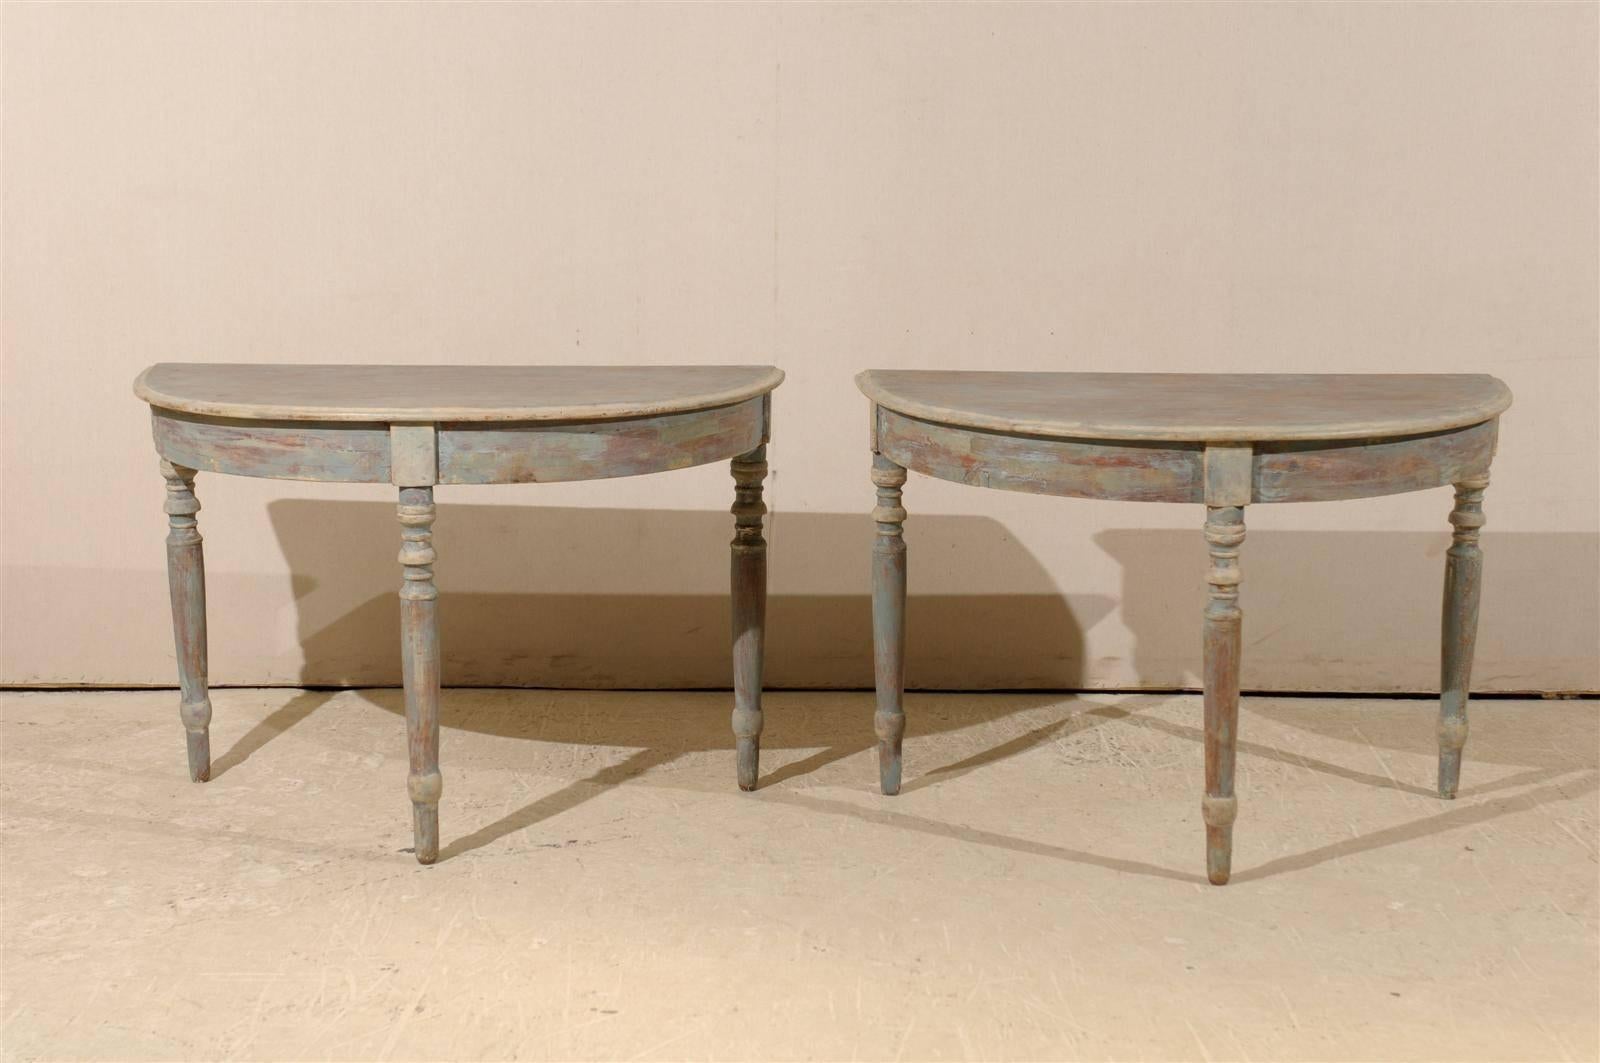 A pair of Swedish 19th century painted wood demilune tables with turned legs and light blue/grey finish with some wood coming through. Put together, the demilunes form a round table.